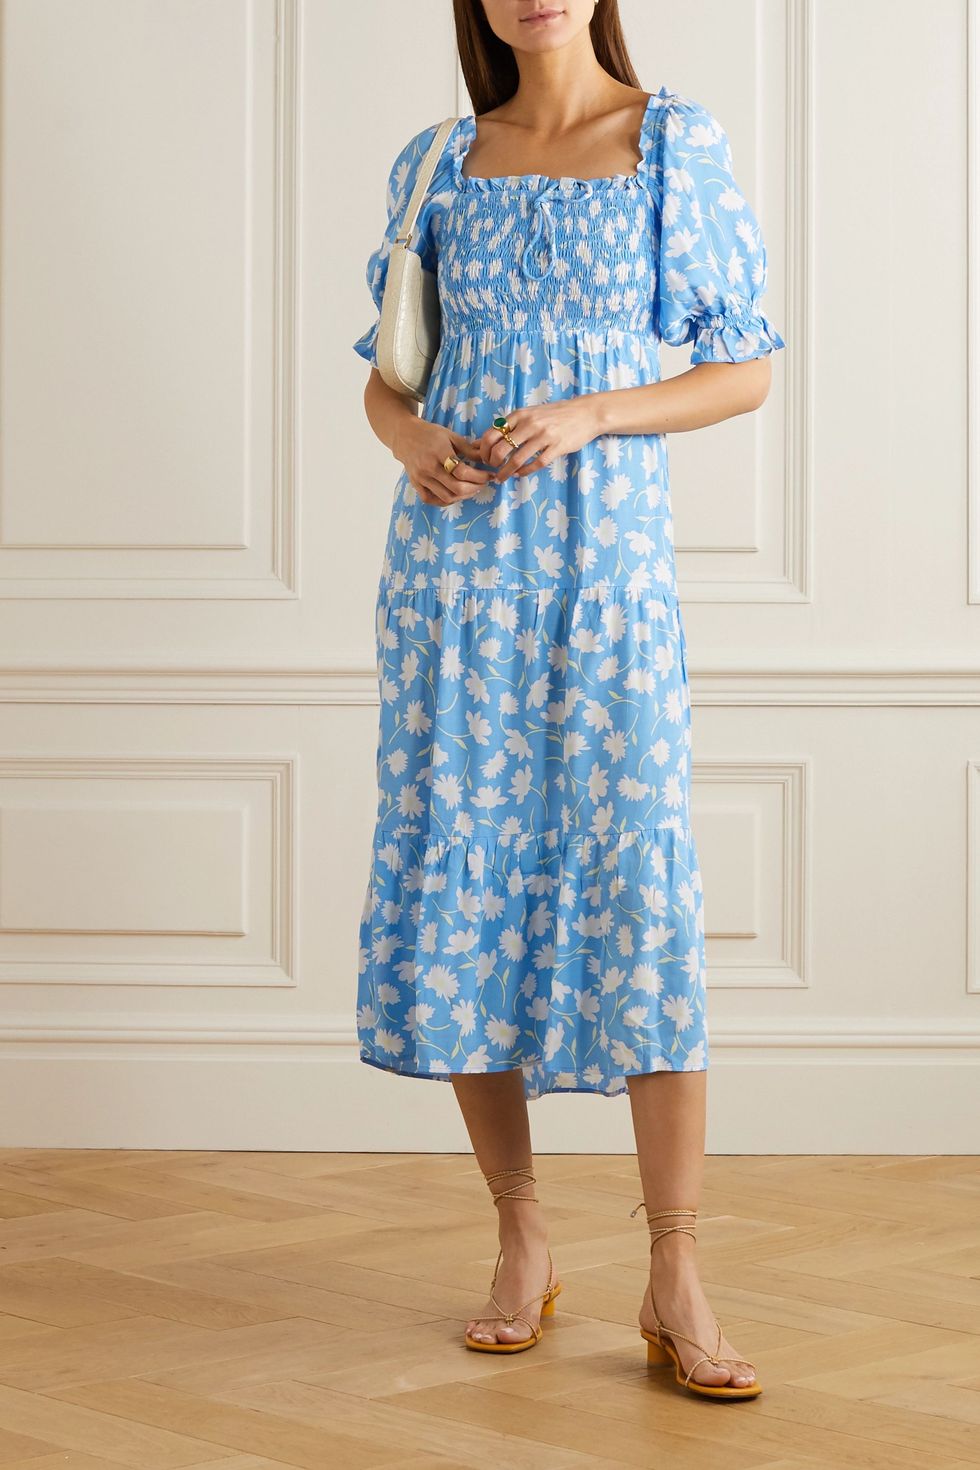 House Dress Trend for 2020 — Best House Dresses to Shop